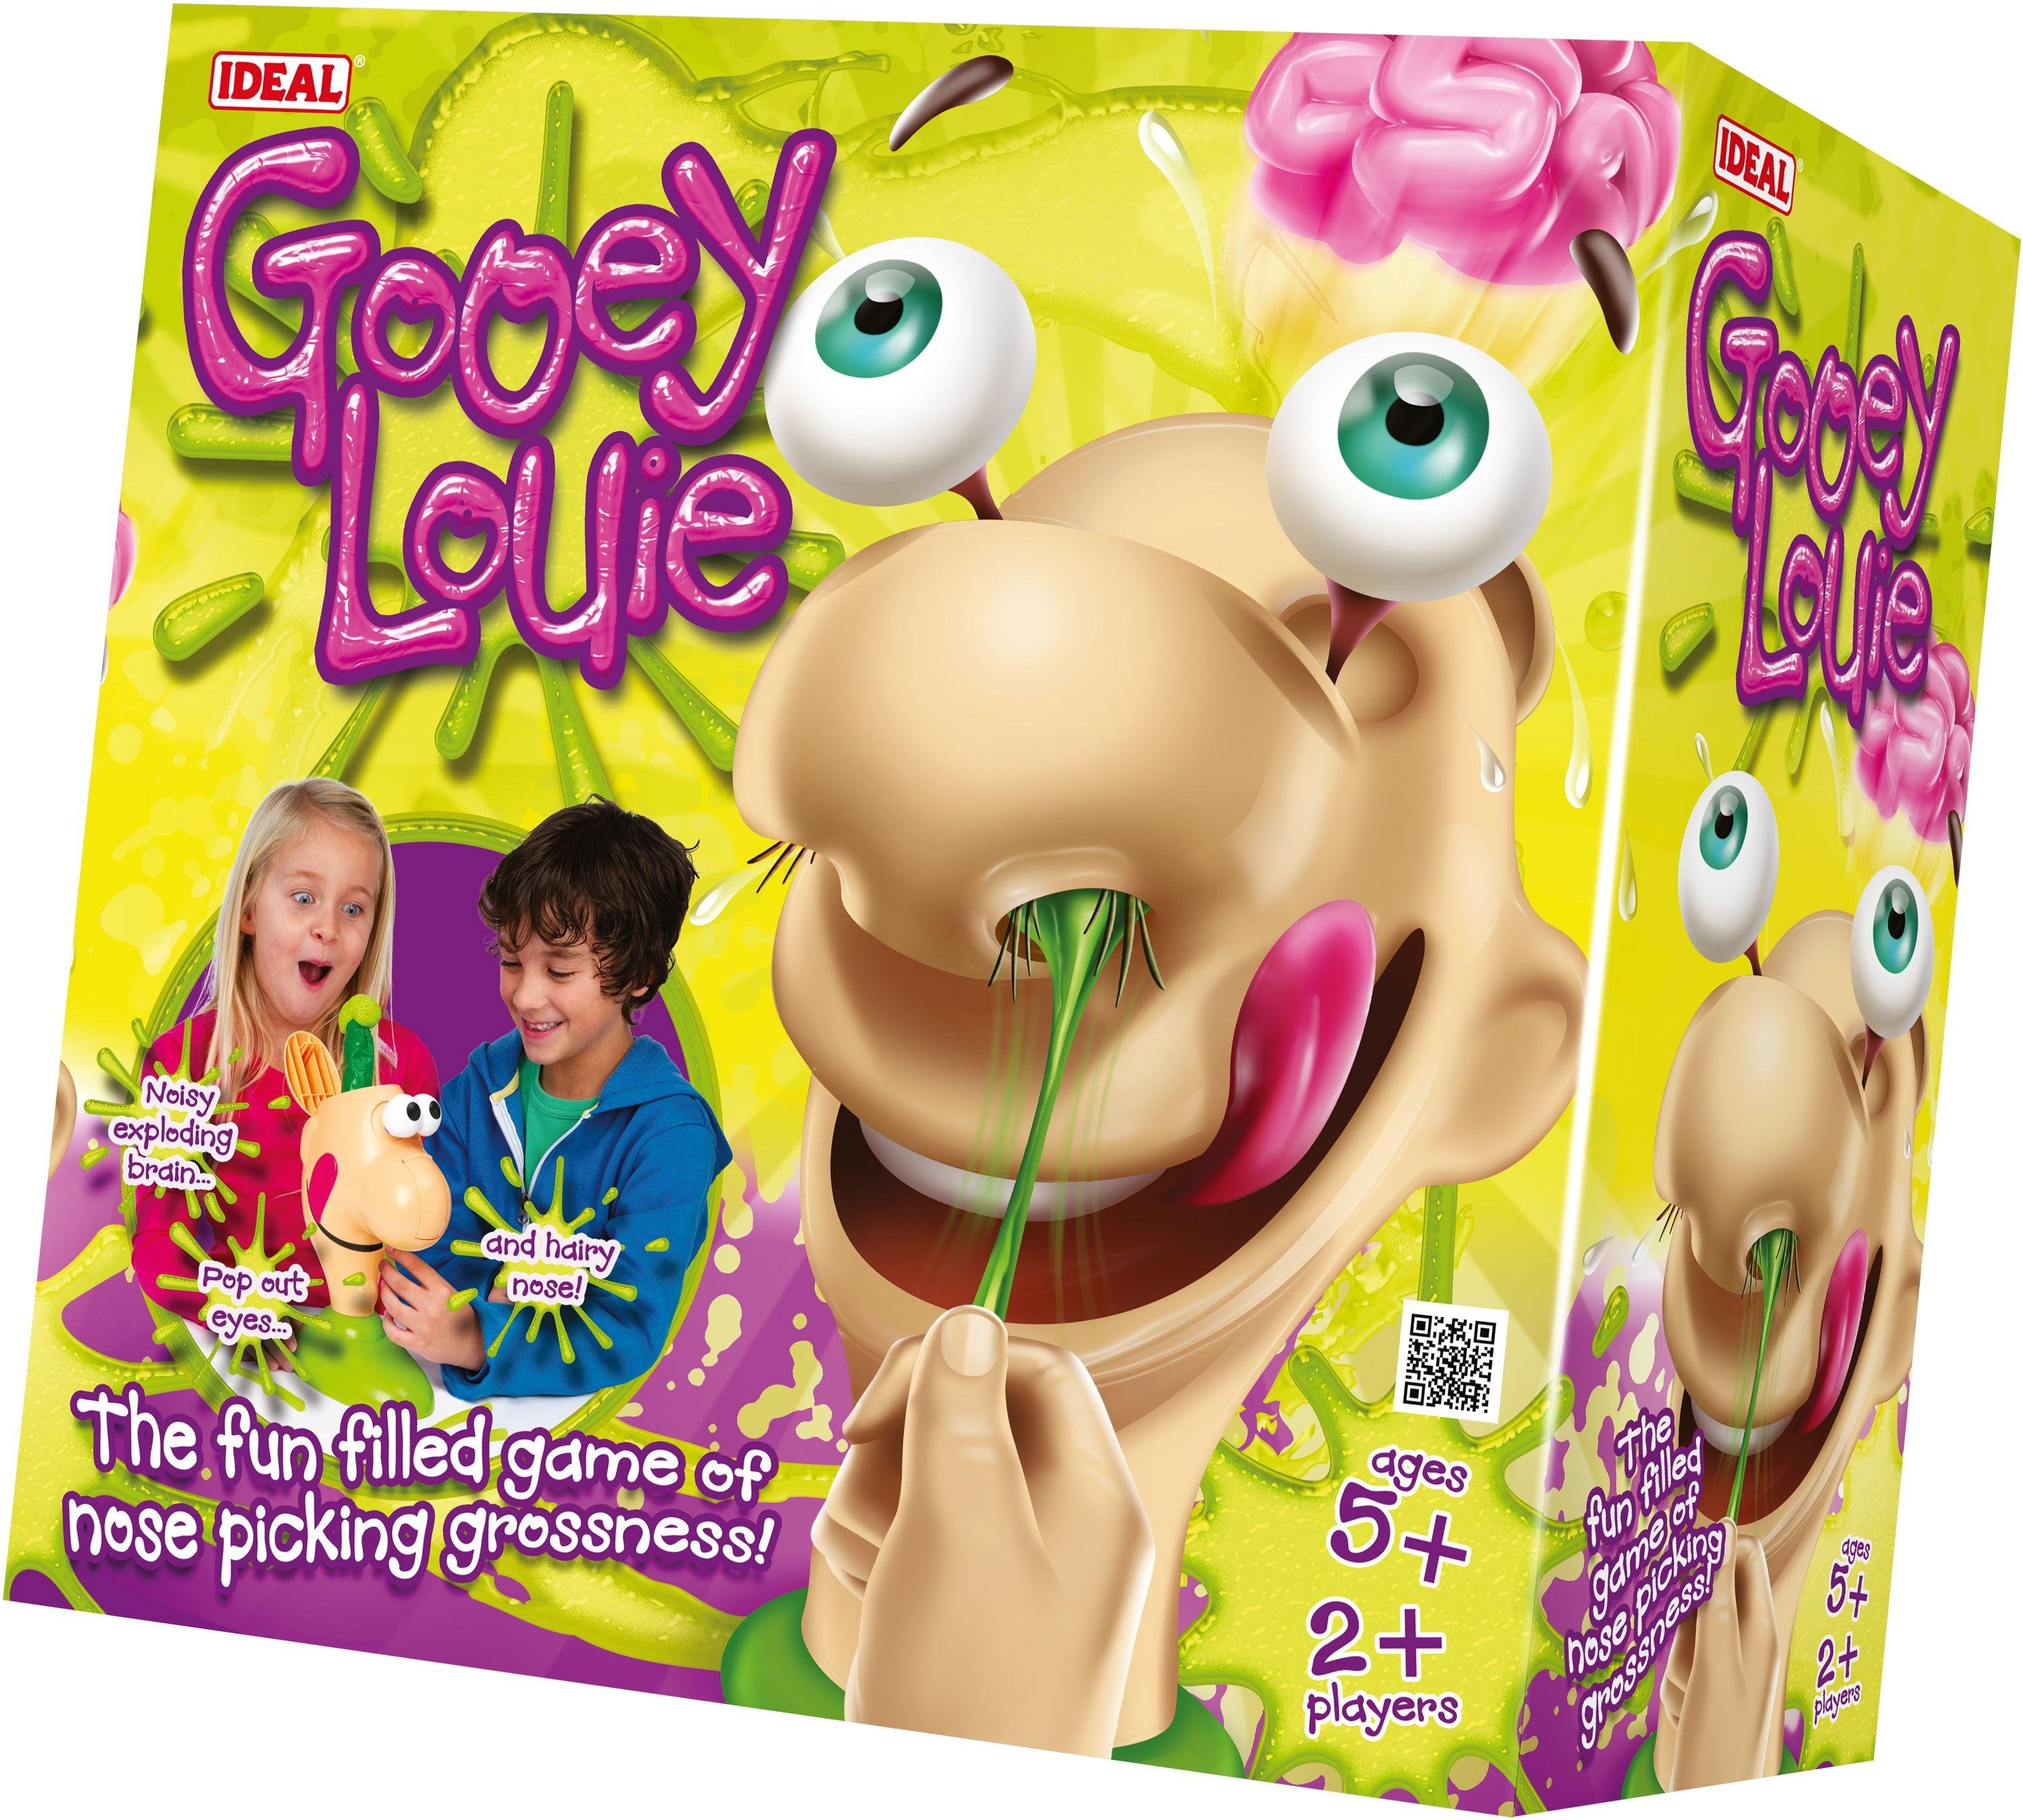 Ideal Gooey Louie Game Review